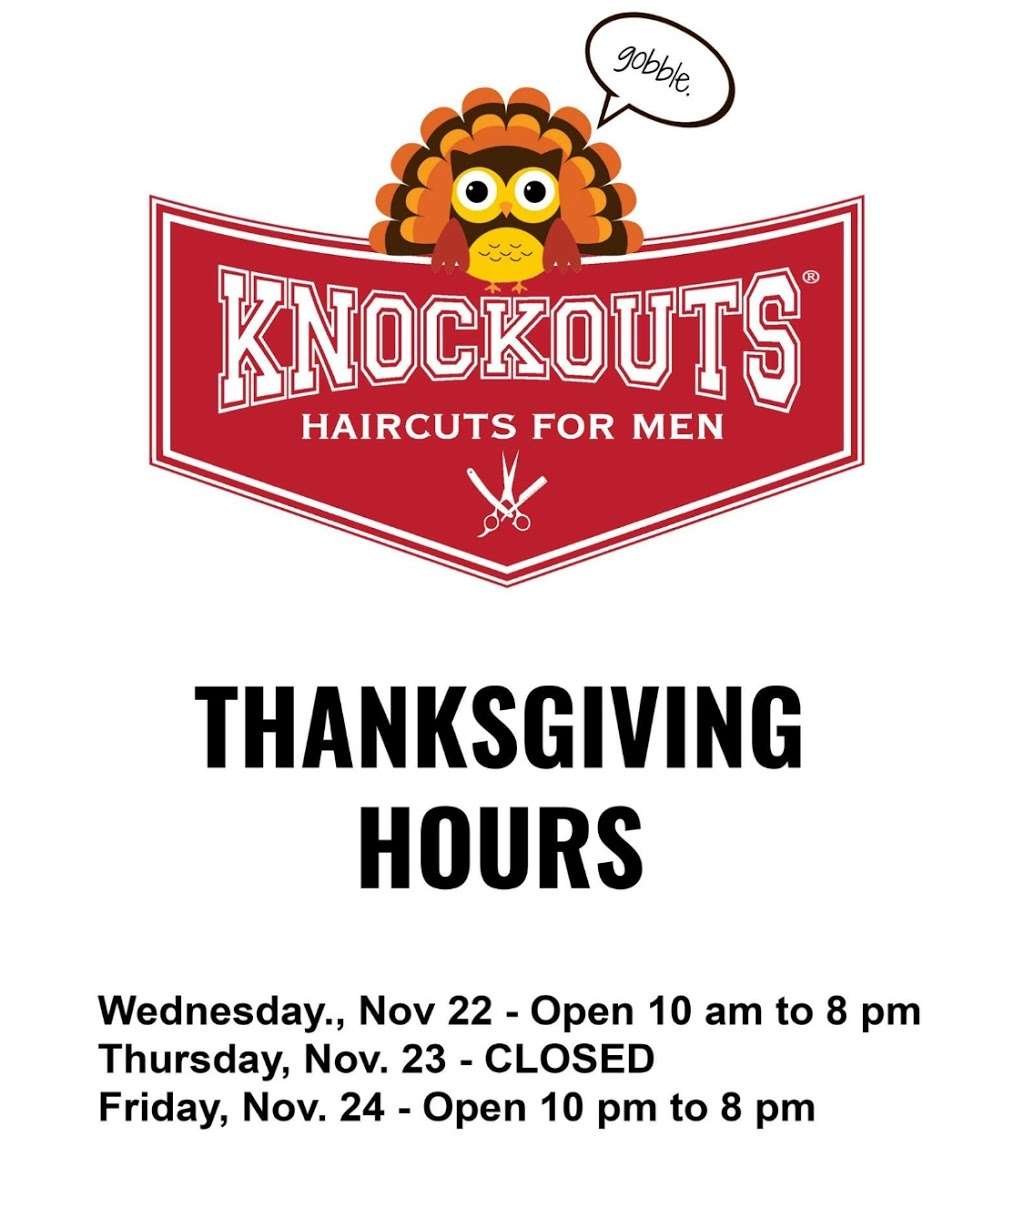 Knockouts Haircuts For Men | 8353 Willow St, Lone Tree, CO 80124 | Phone: (303) 662-1751